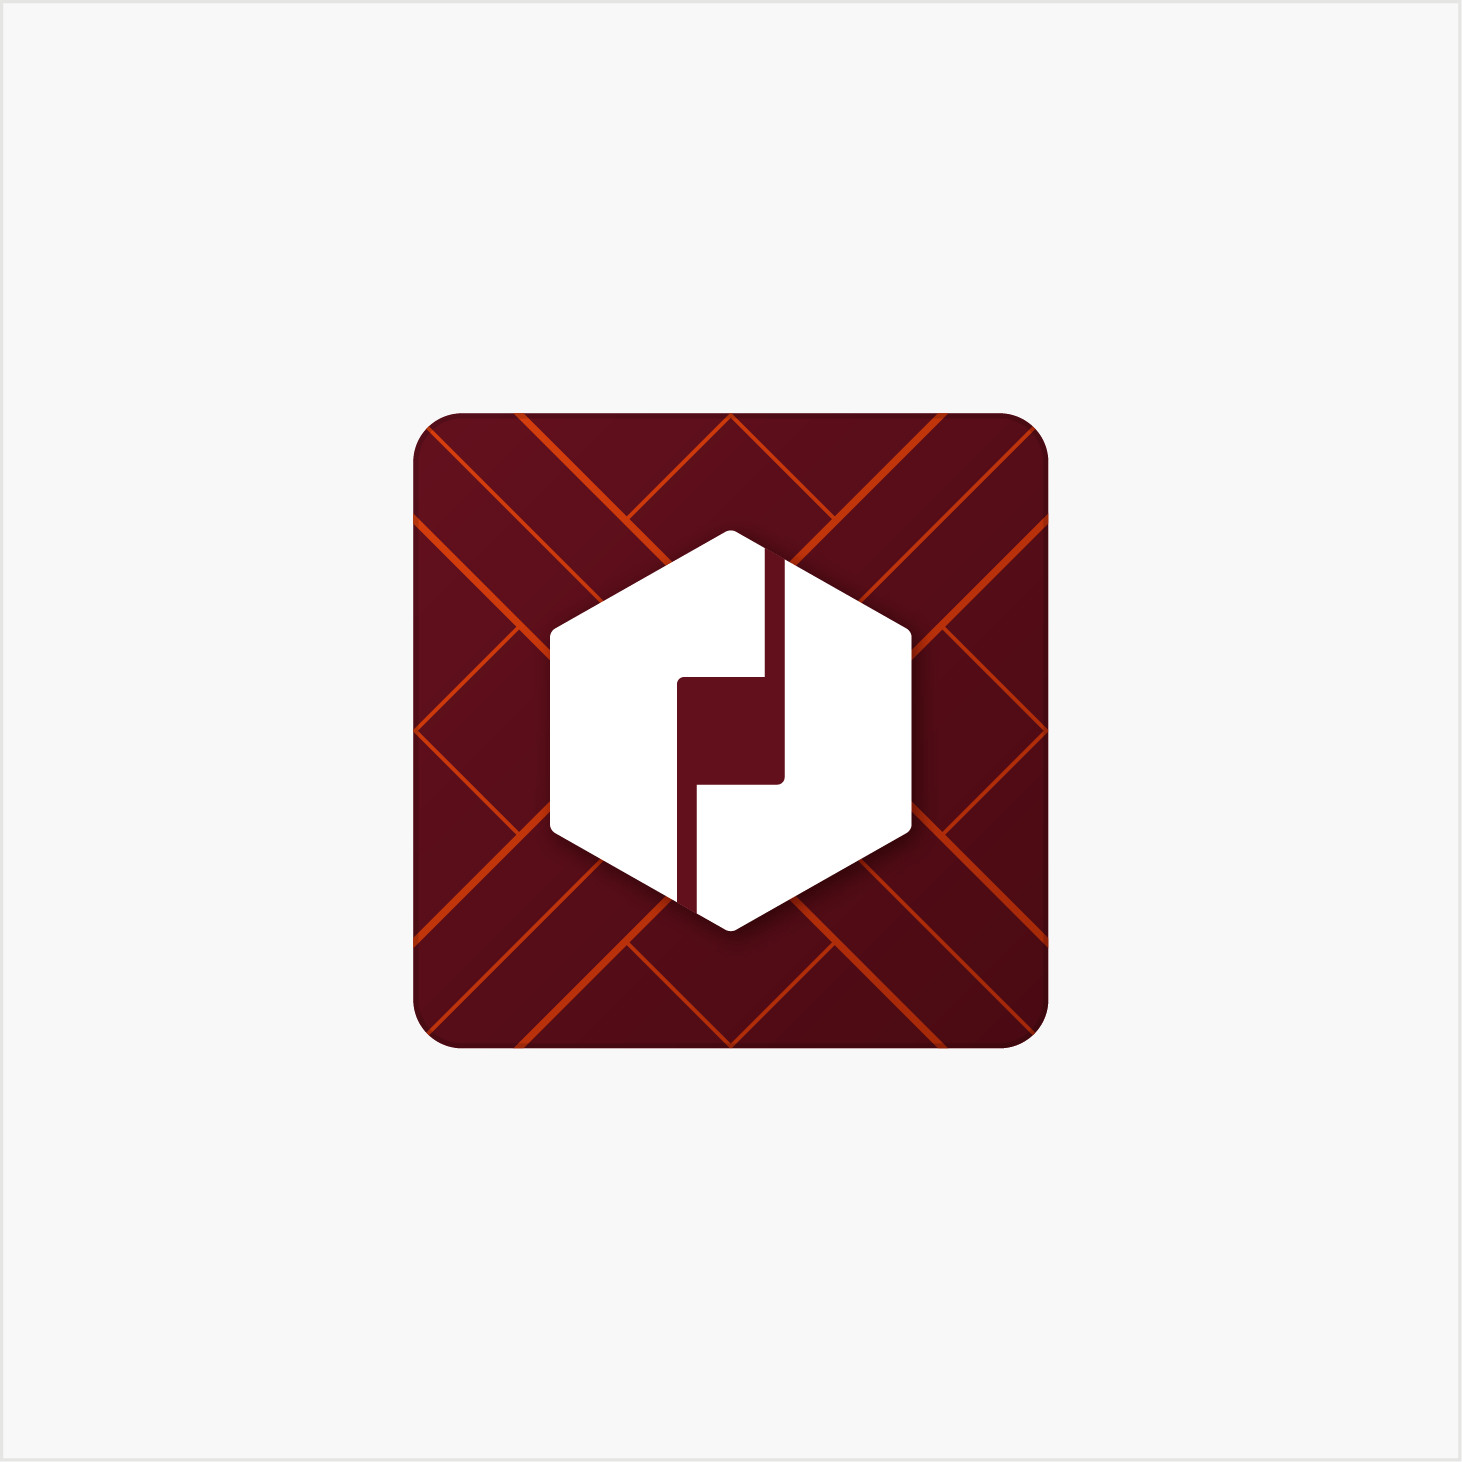 Uber App Logo - The Interesting Thing About The Uber 